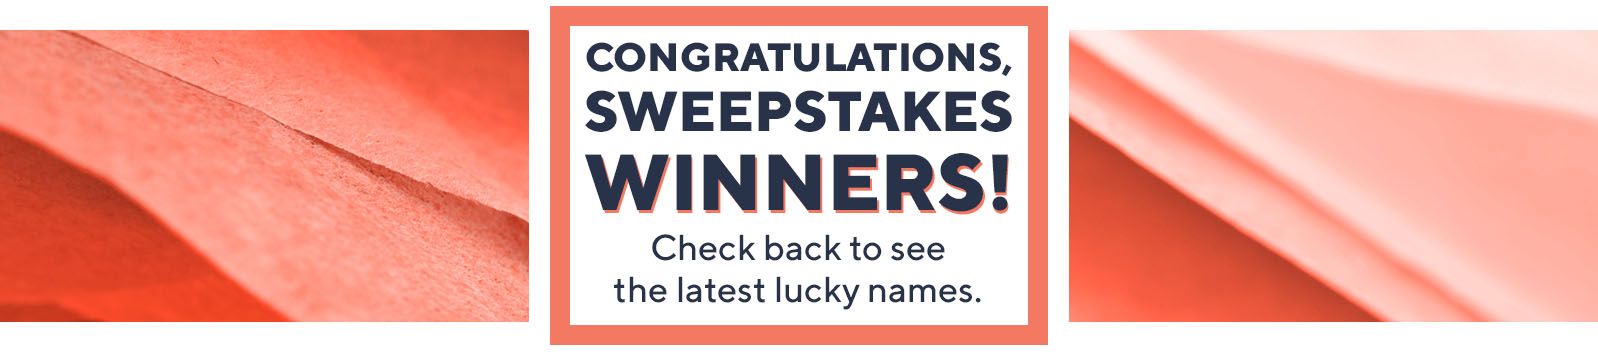 Congratulations, Sweepstakes Winners! Check back to see the latest lucky names